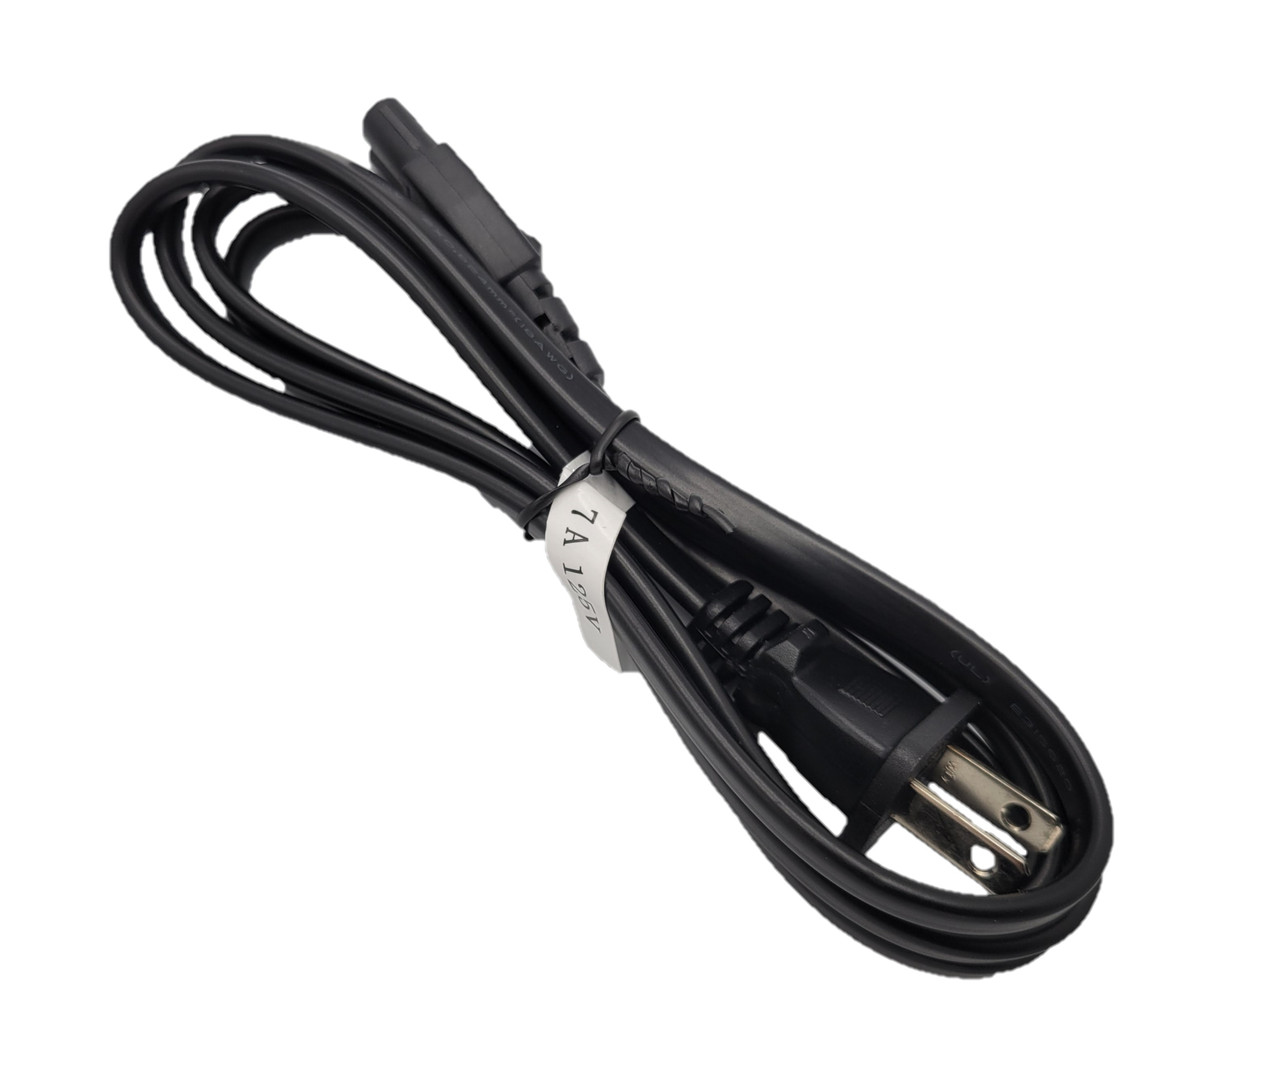 1.5 Meter Connectors, AC Notebook AWG) Cord (18 - Power 2-Prong Micro Black